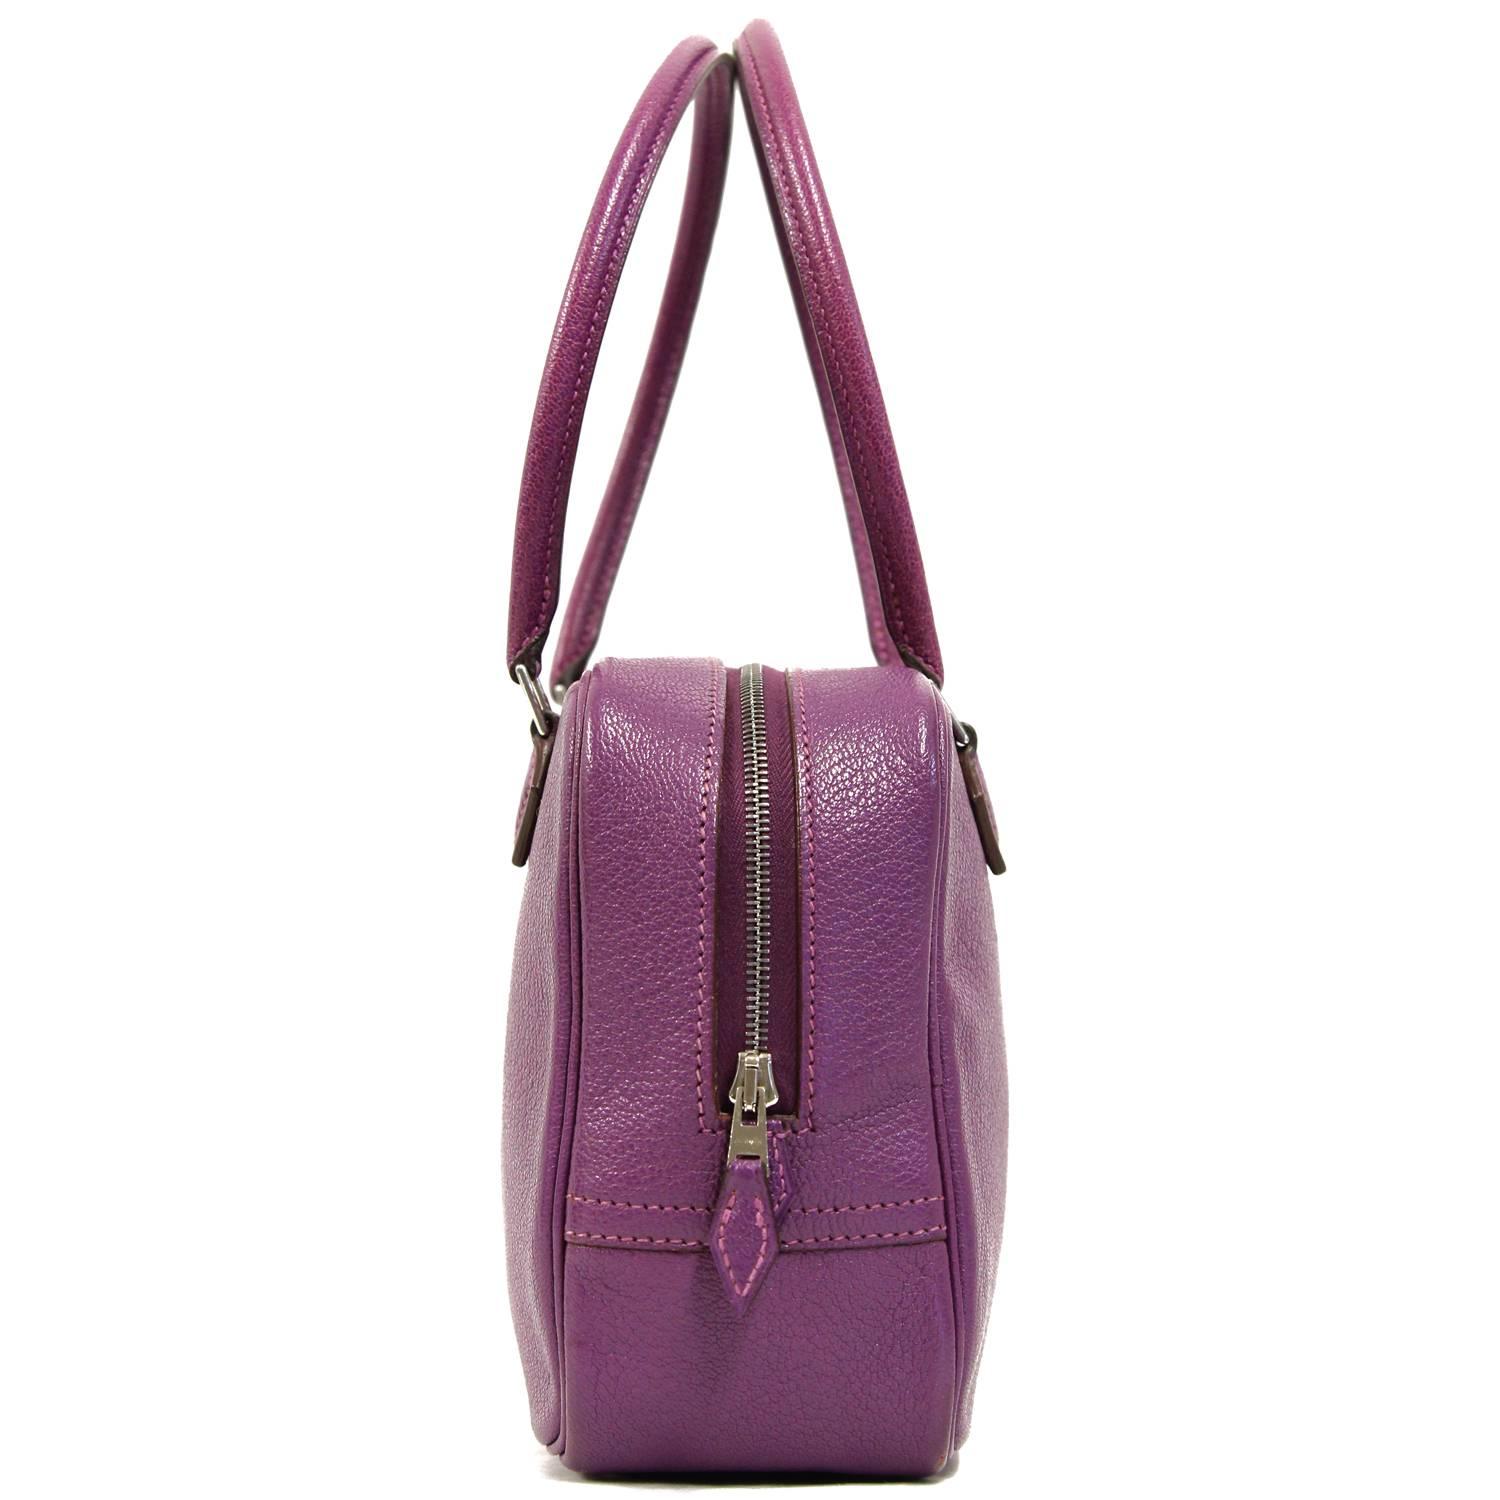 Lively Hermès purple leather hand bag. The item was produced in 2007 Cod. [K] and its in very good conditions, it only shows few very light signs of utilization. It comes with its original dustbag.
Width: 20 cm
Height: 14 cm
Depth: 7 cm
Shoulder